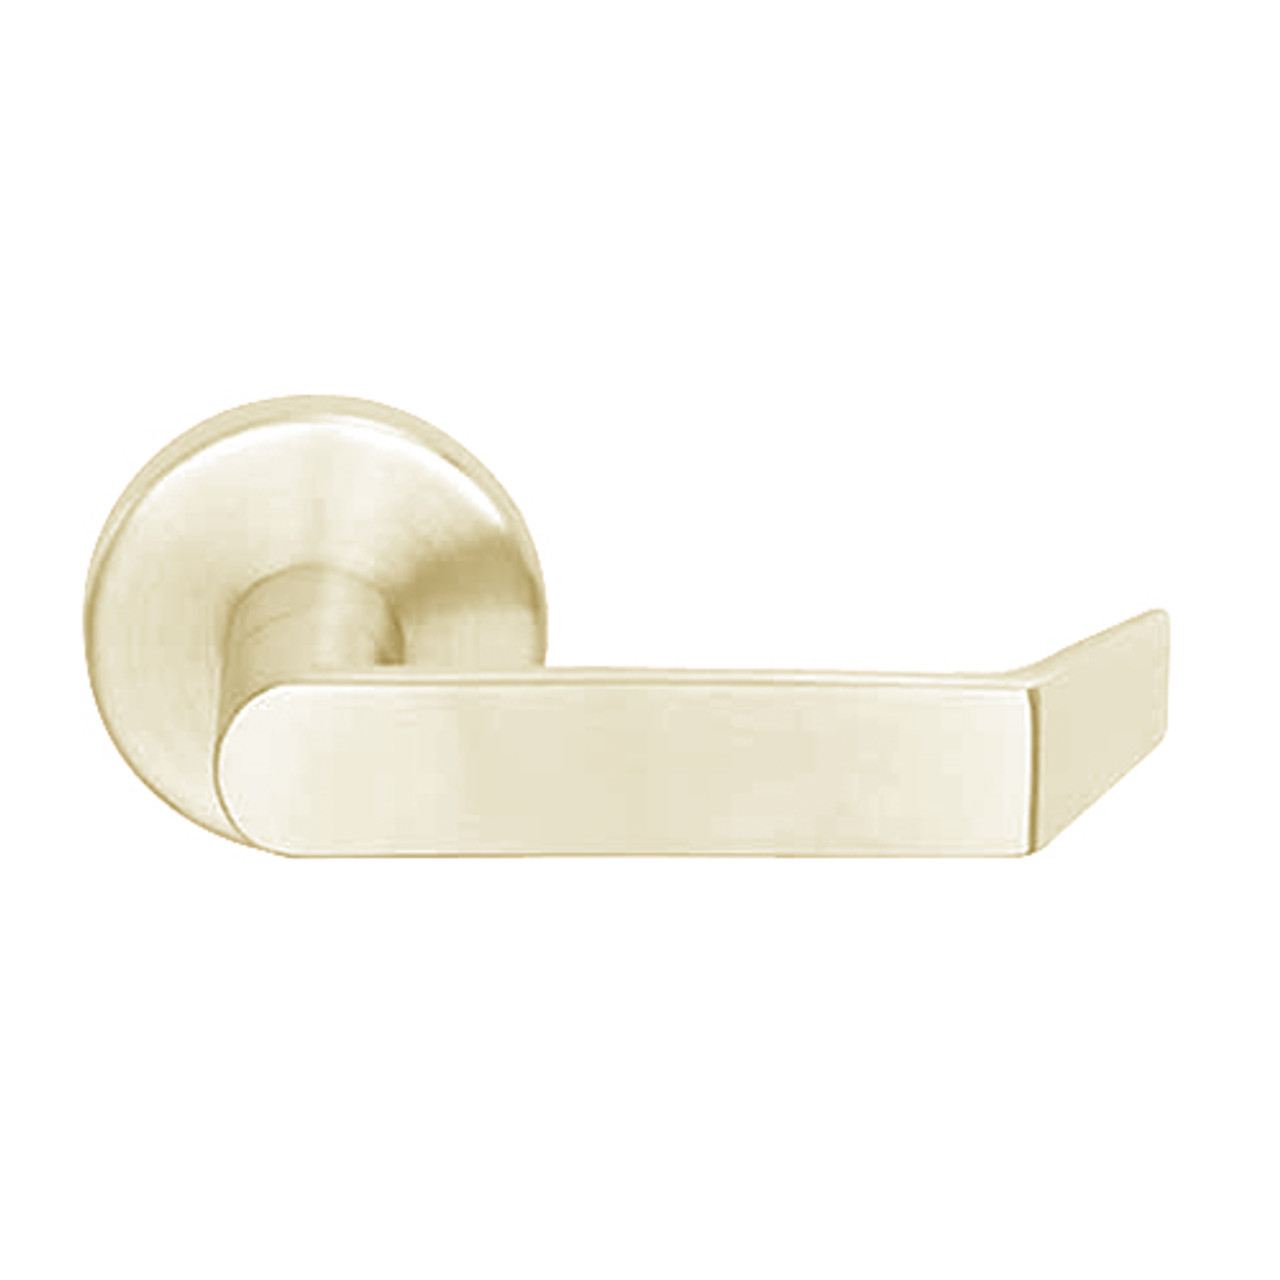 L9050L-06A-606 Schlage L Series Less Cylinder Entrance Commercial Mortise Lock with 06 Cast Lever Design in Satin Brass